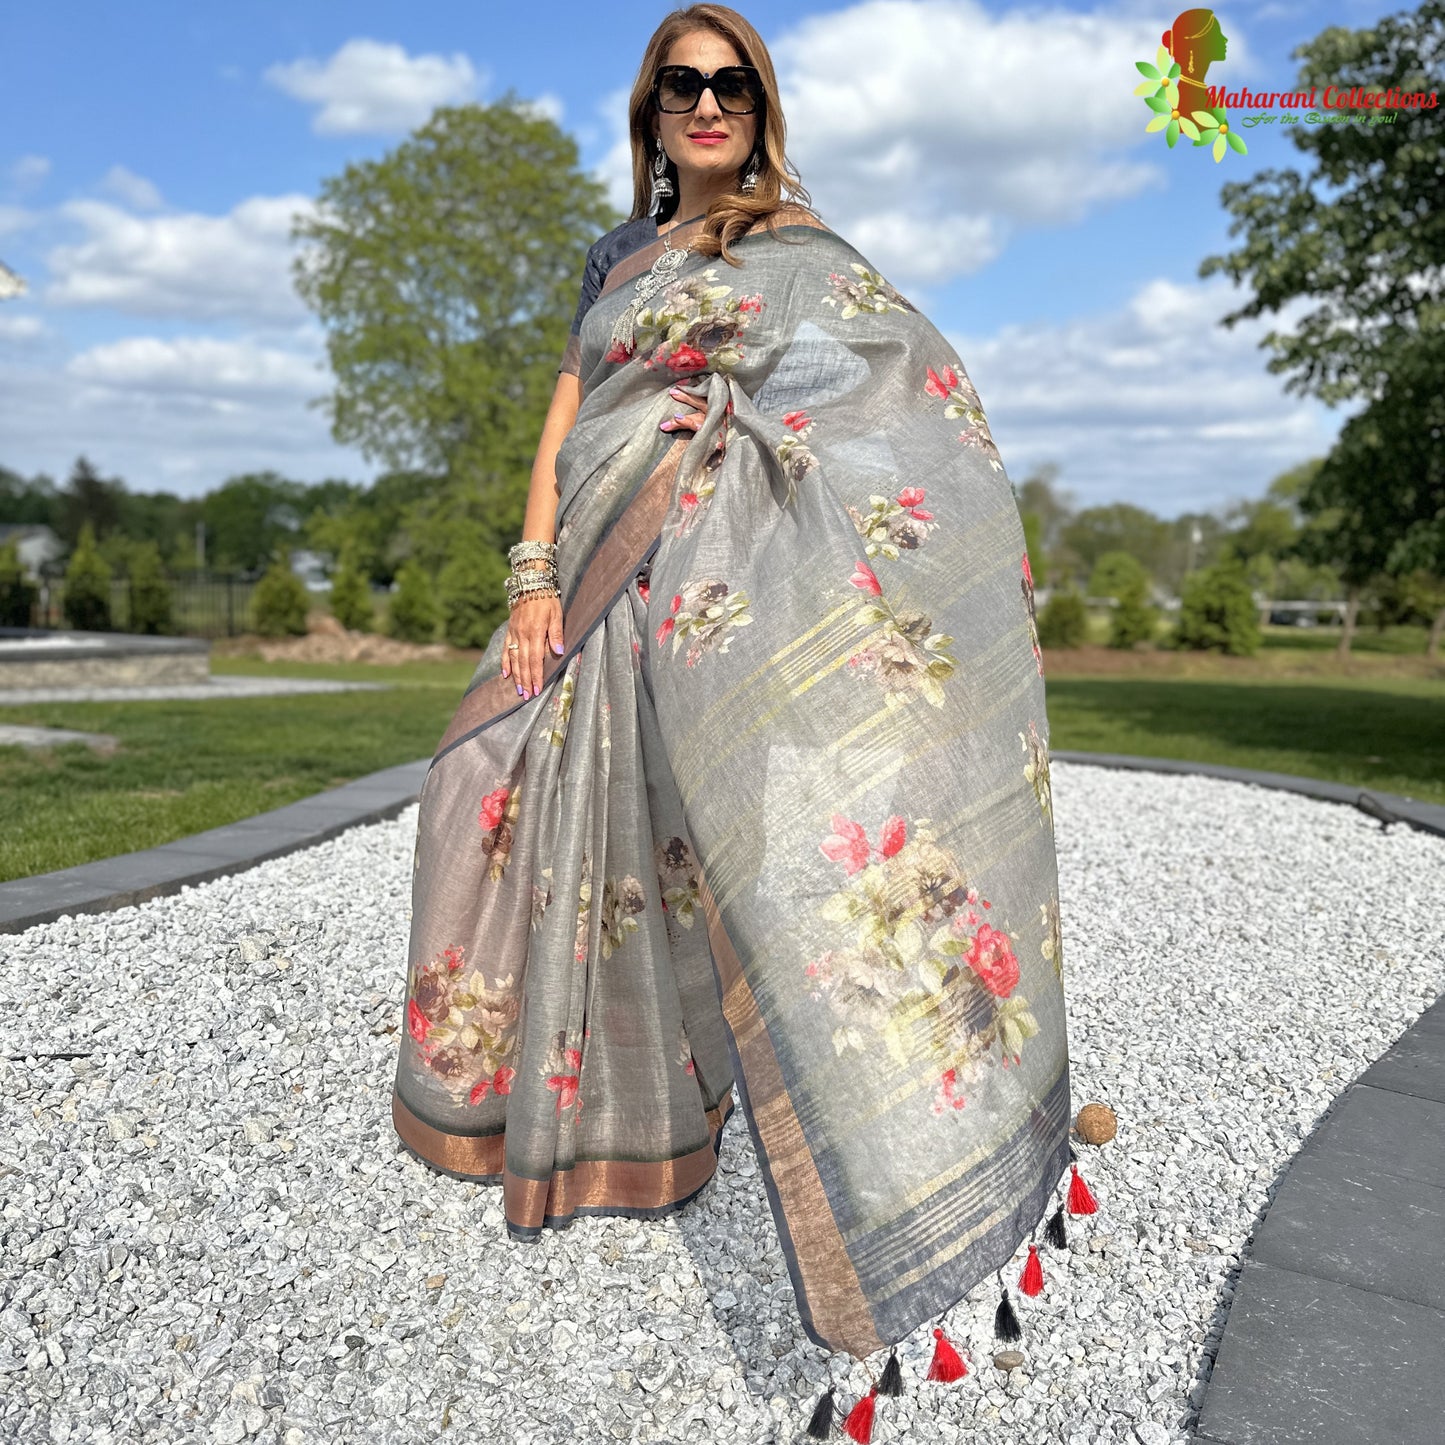 Maharani's Simple Elegance Matka Silk Saree - Floral Grey (with stitched blouse and petticoat)